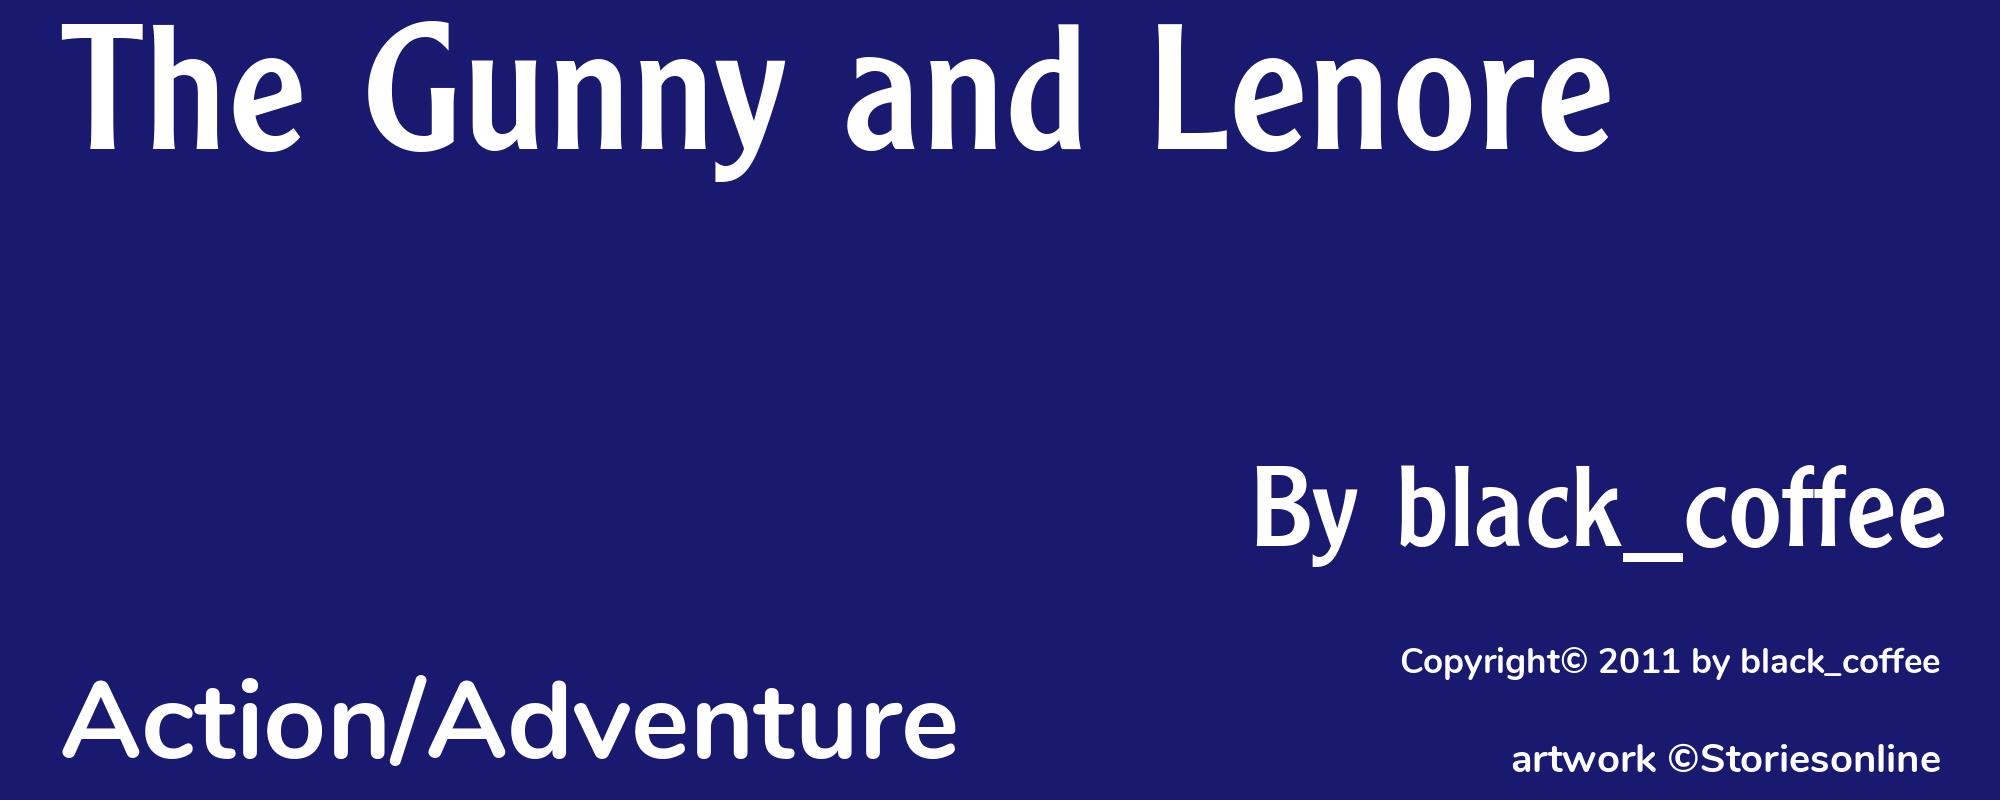 The Gunny and Lenore - Cover